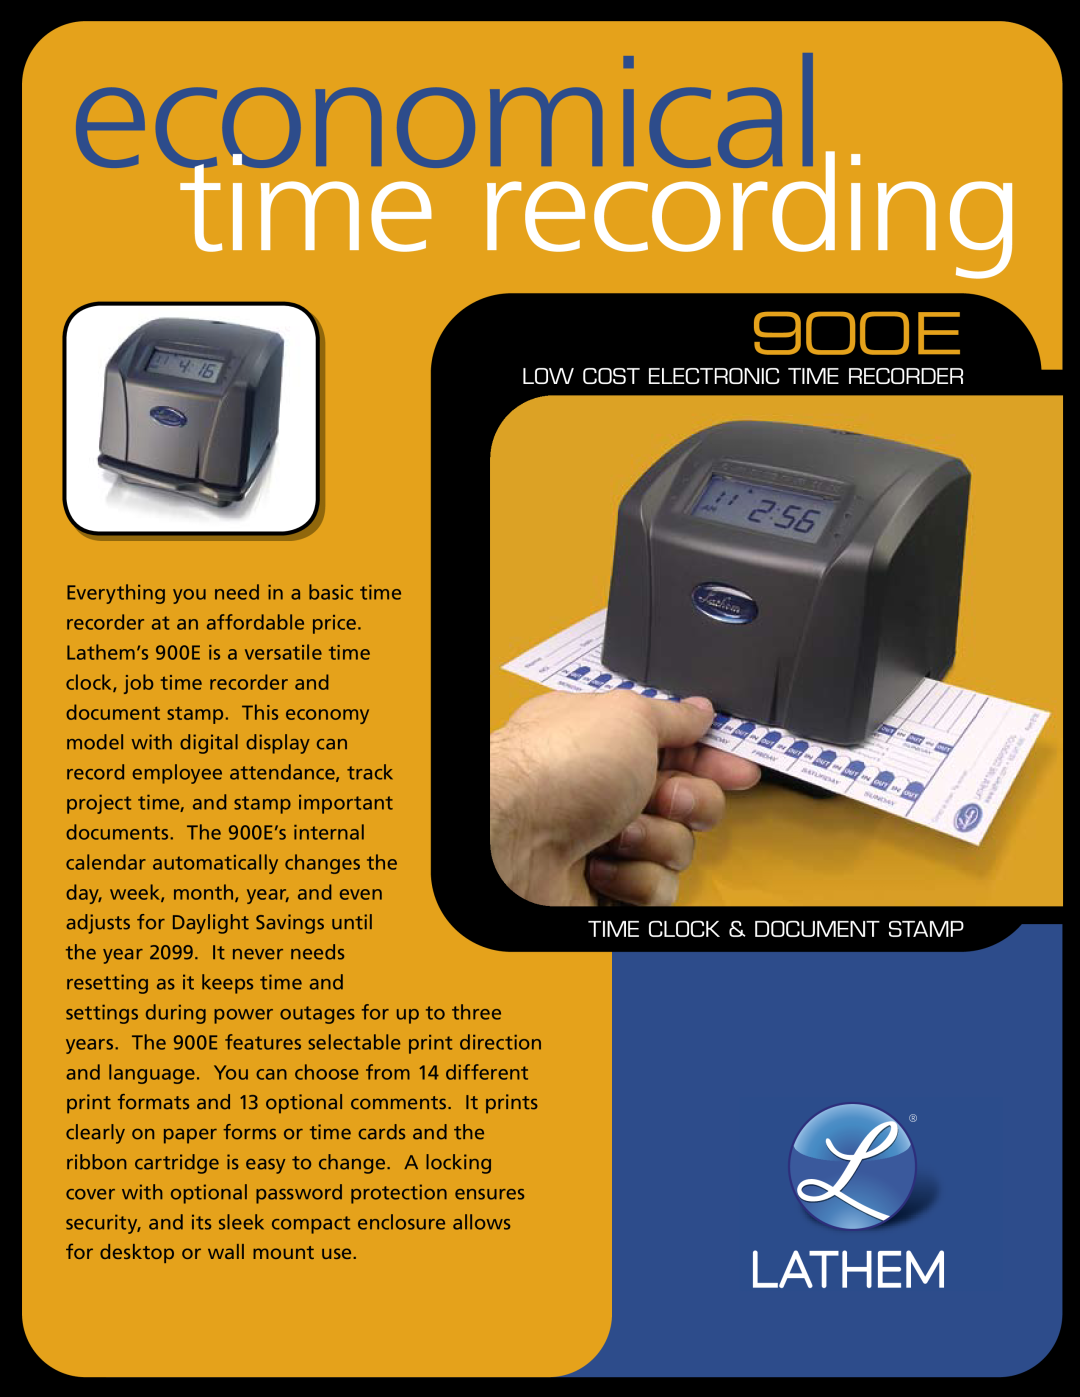 Lathem 900E manual economical, time recording, Low cost electronic time recorder, Time Clock & Document Stamp 